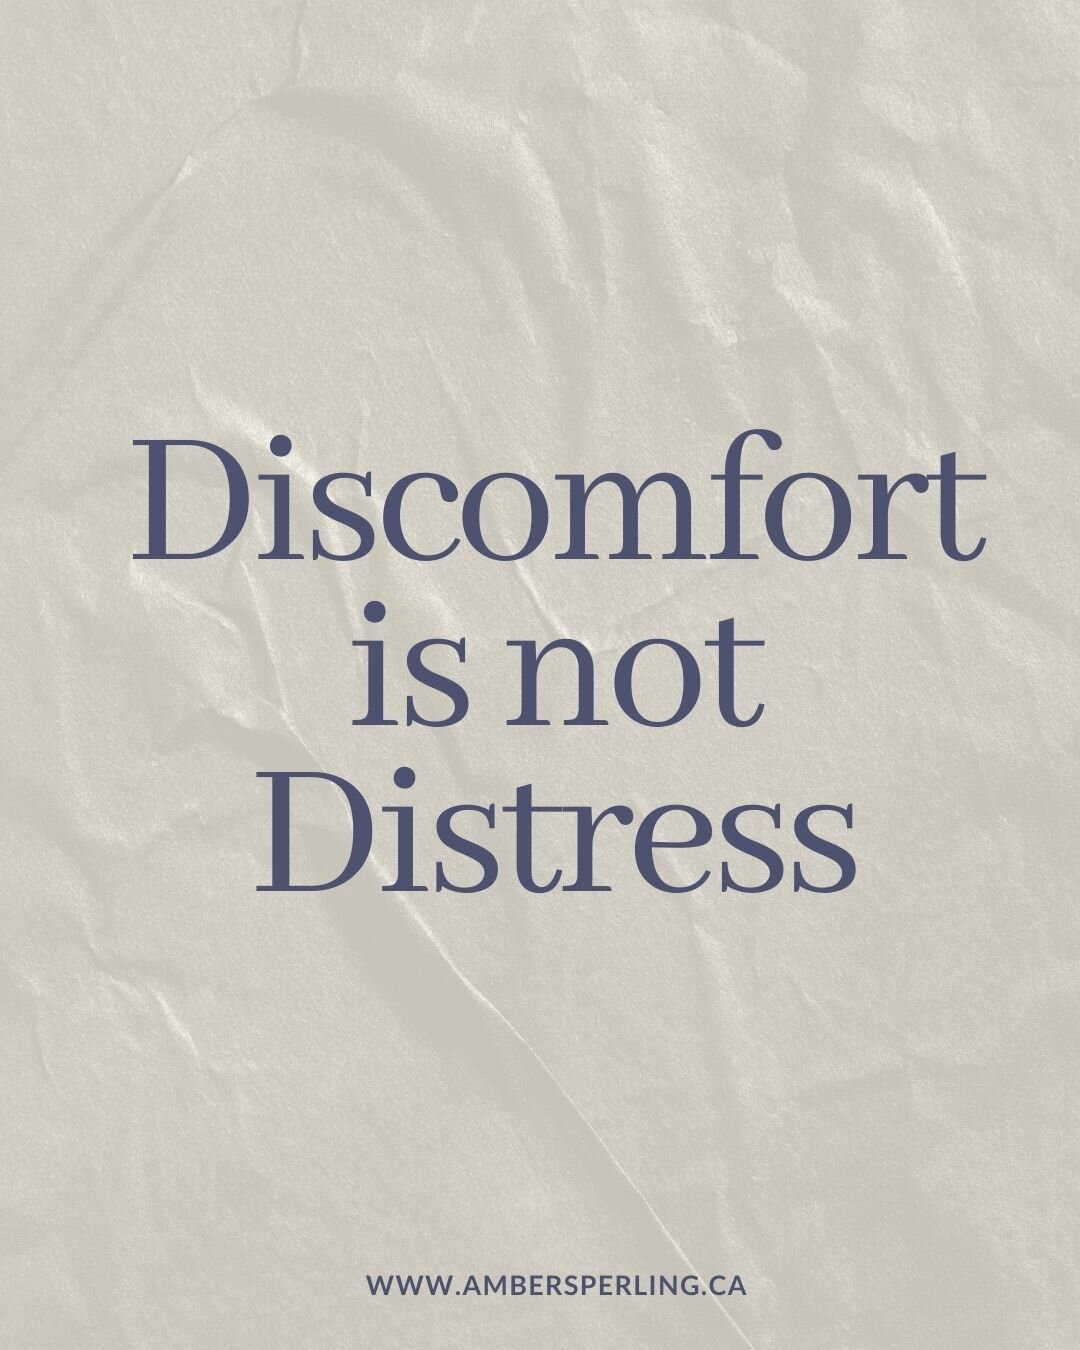 In our roles as parents, it's natural to want to shield our children from discomfort or distress. We aim to wrap them in comfort, ensuring they never feel a moment's unease. However, it's vital to remember that learning how to tolerate discomfort is 